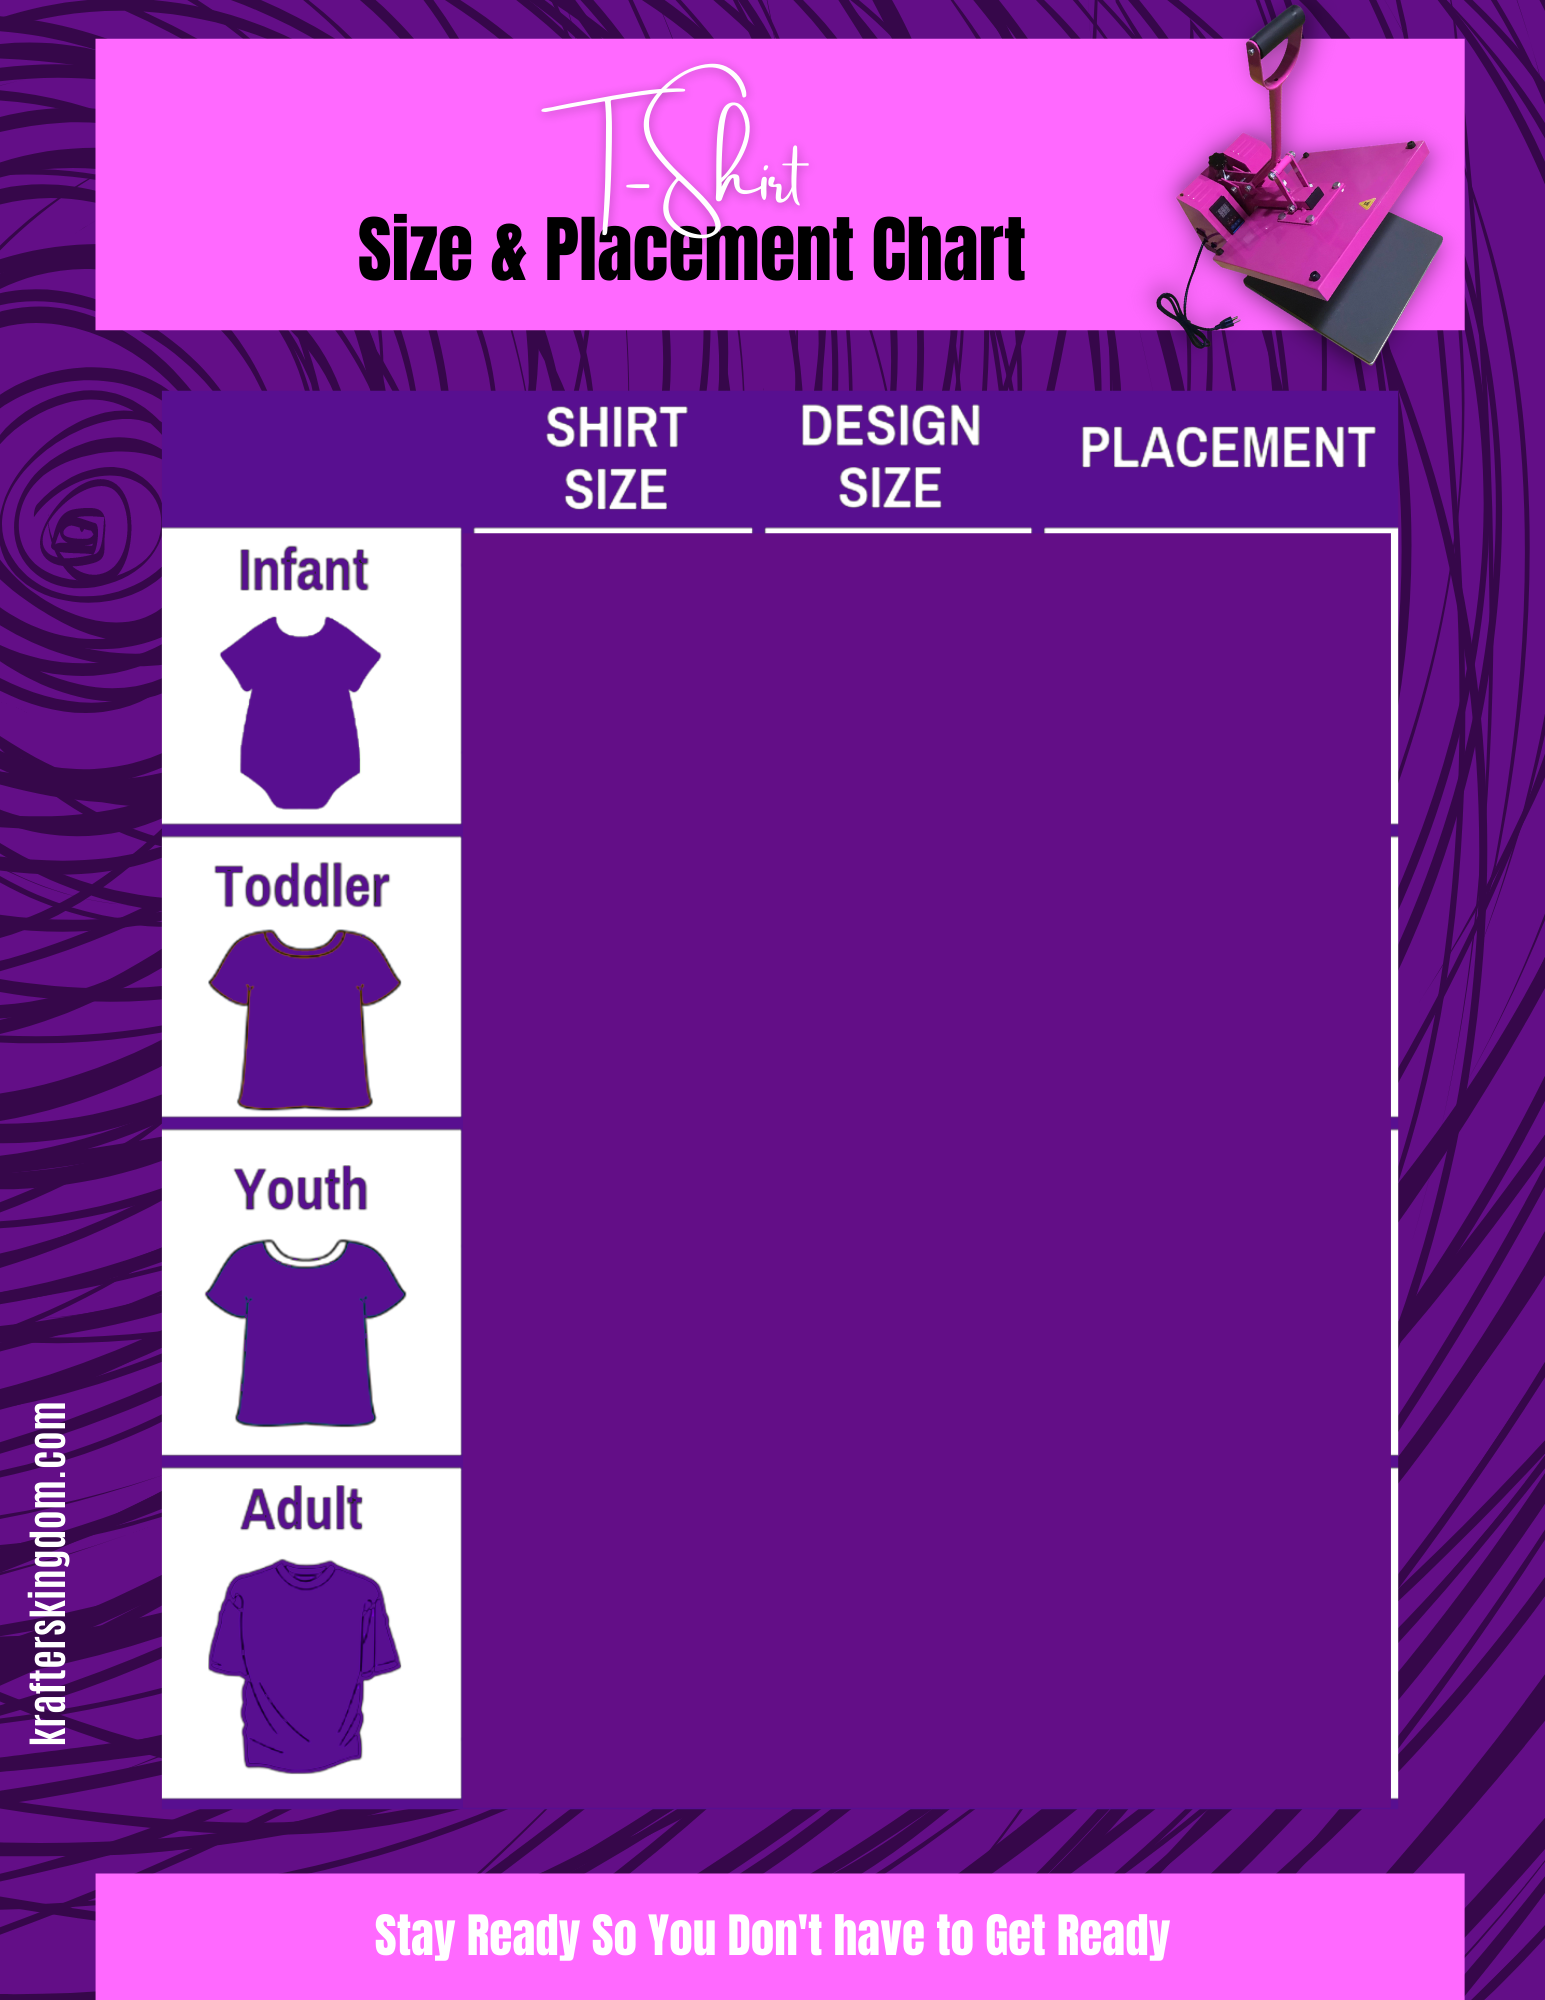 Sizing & Placement Chart Krafters Kingdom